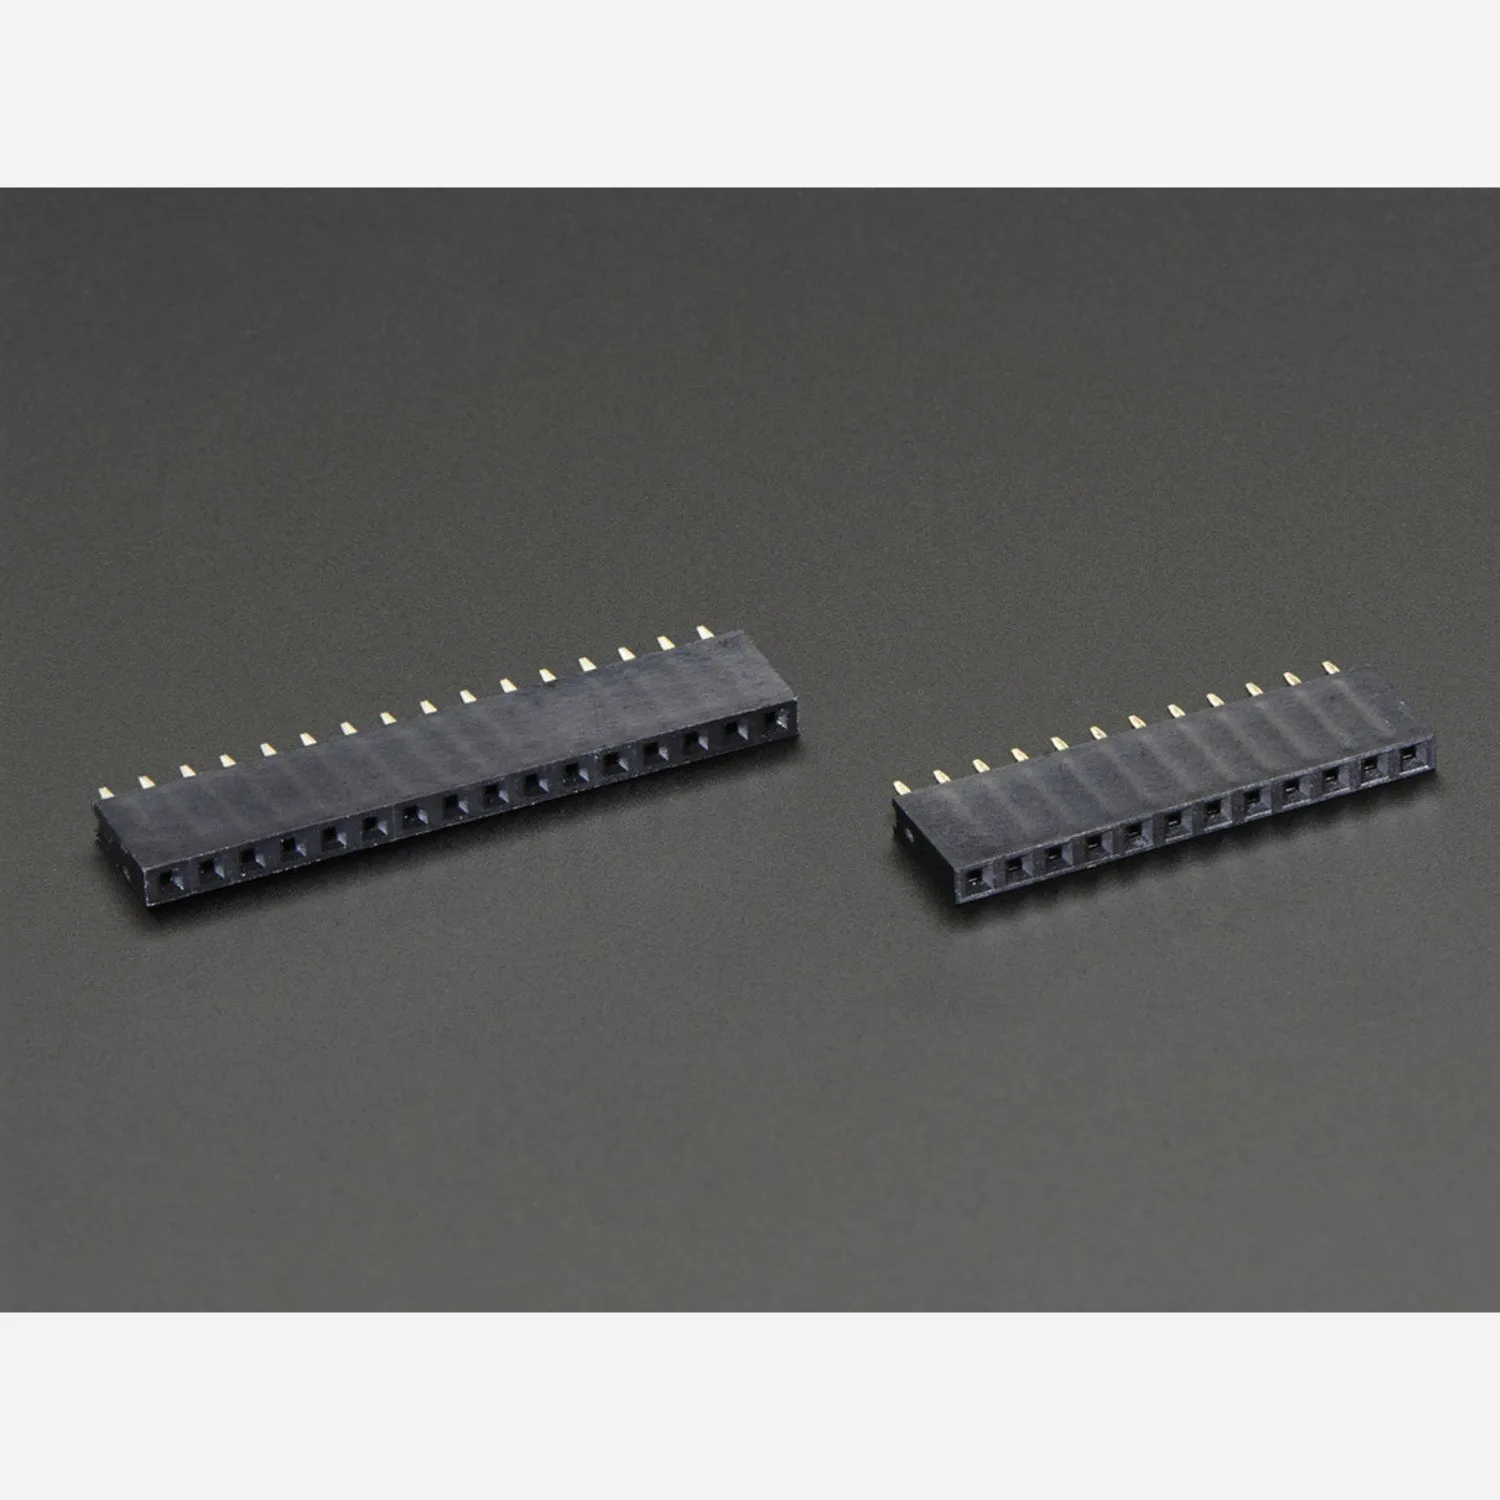 Photo of Feather Header Kit - 12-pin and 16-pin Female Header Set